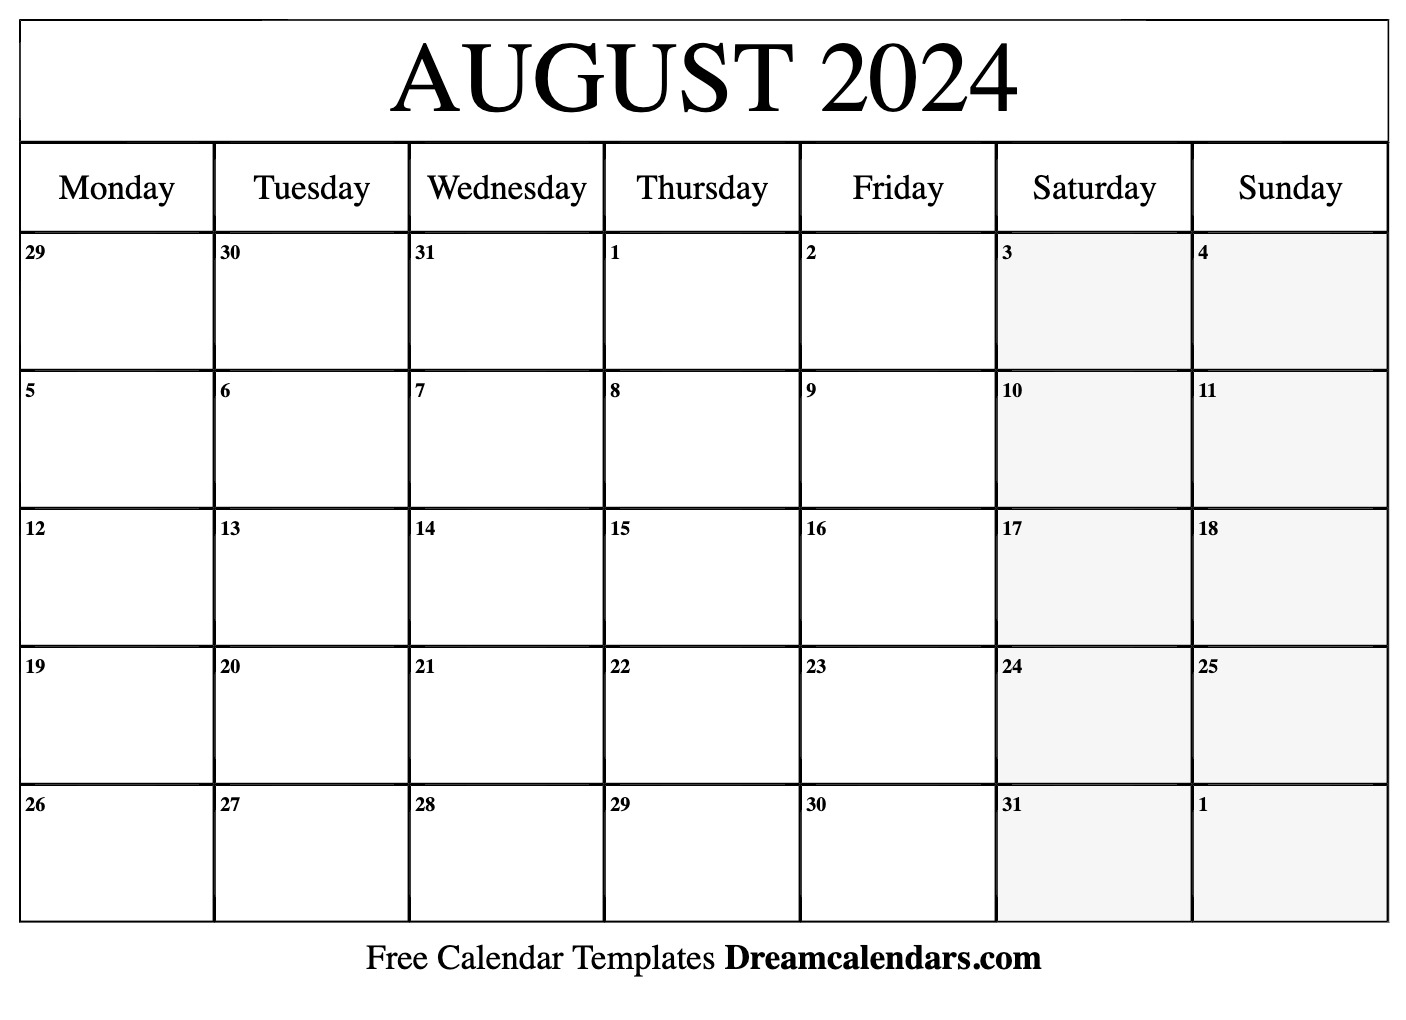 August 2024 Calendar | Free Blank Printable With Holidays for Printable Calendar For July And August 2024